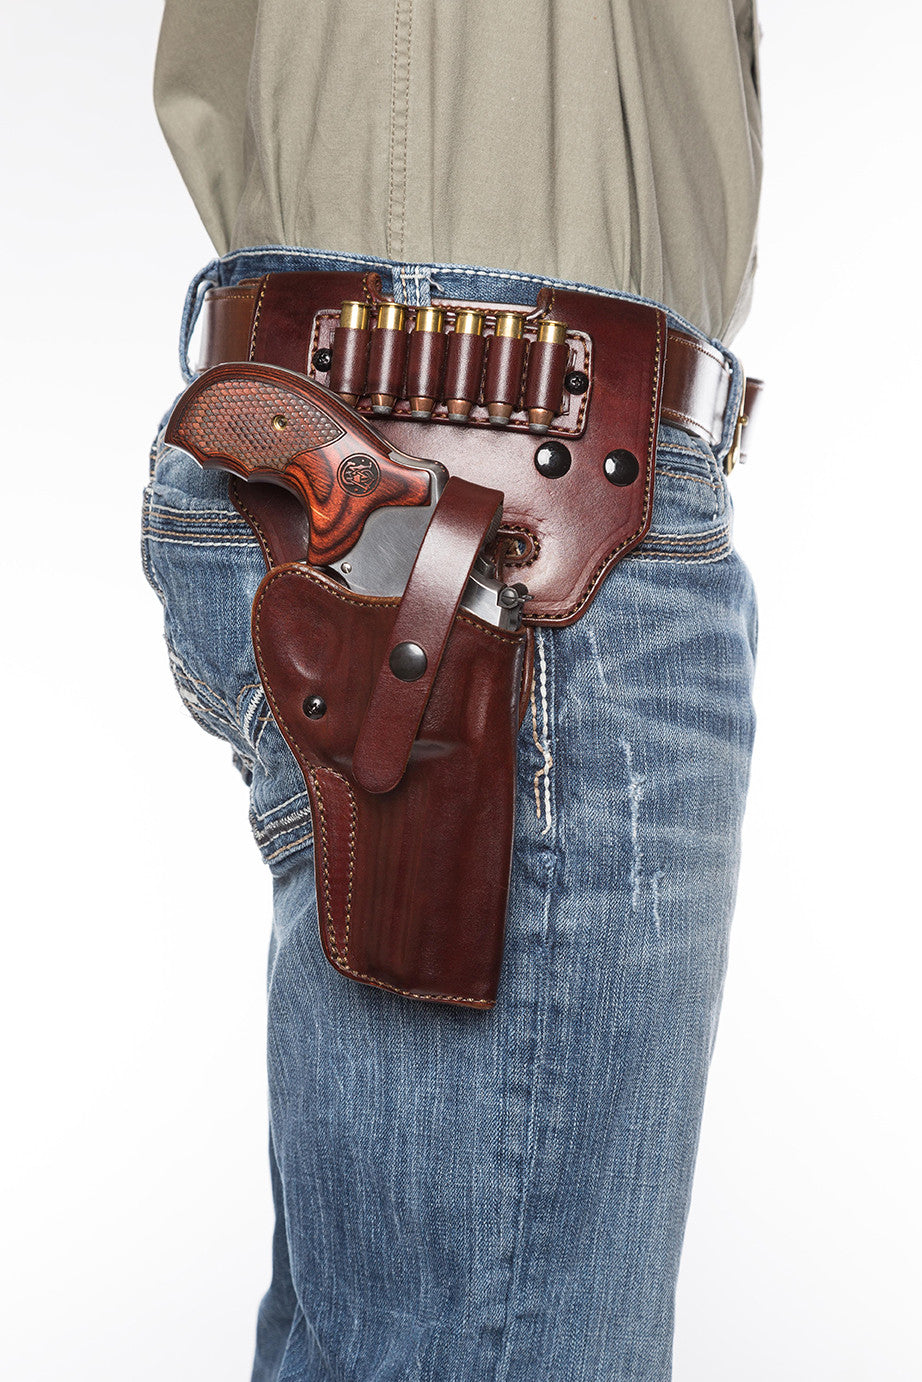 https://www.diamonddcustomleather.com/cdn/shop/products/Brown_with_drop_loop_and_reload_ammo_SF.jpg?v=1494528192